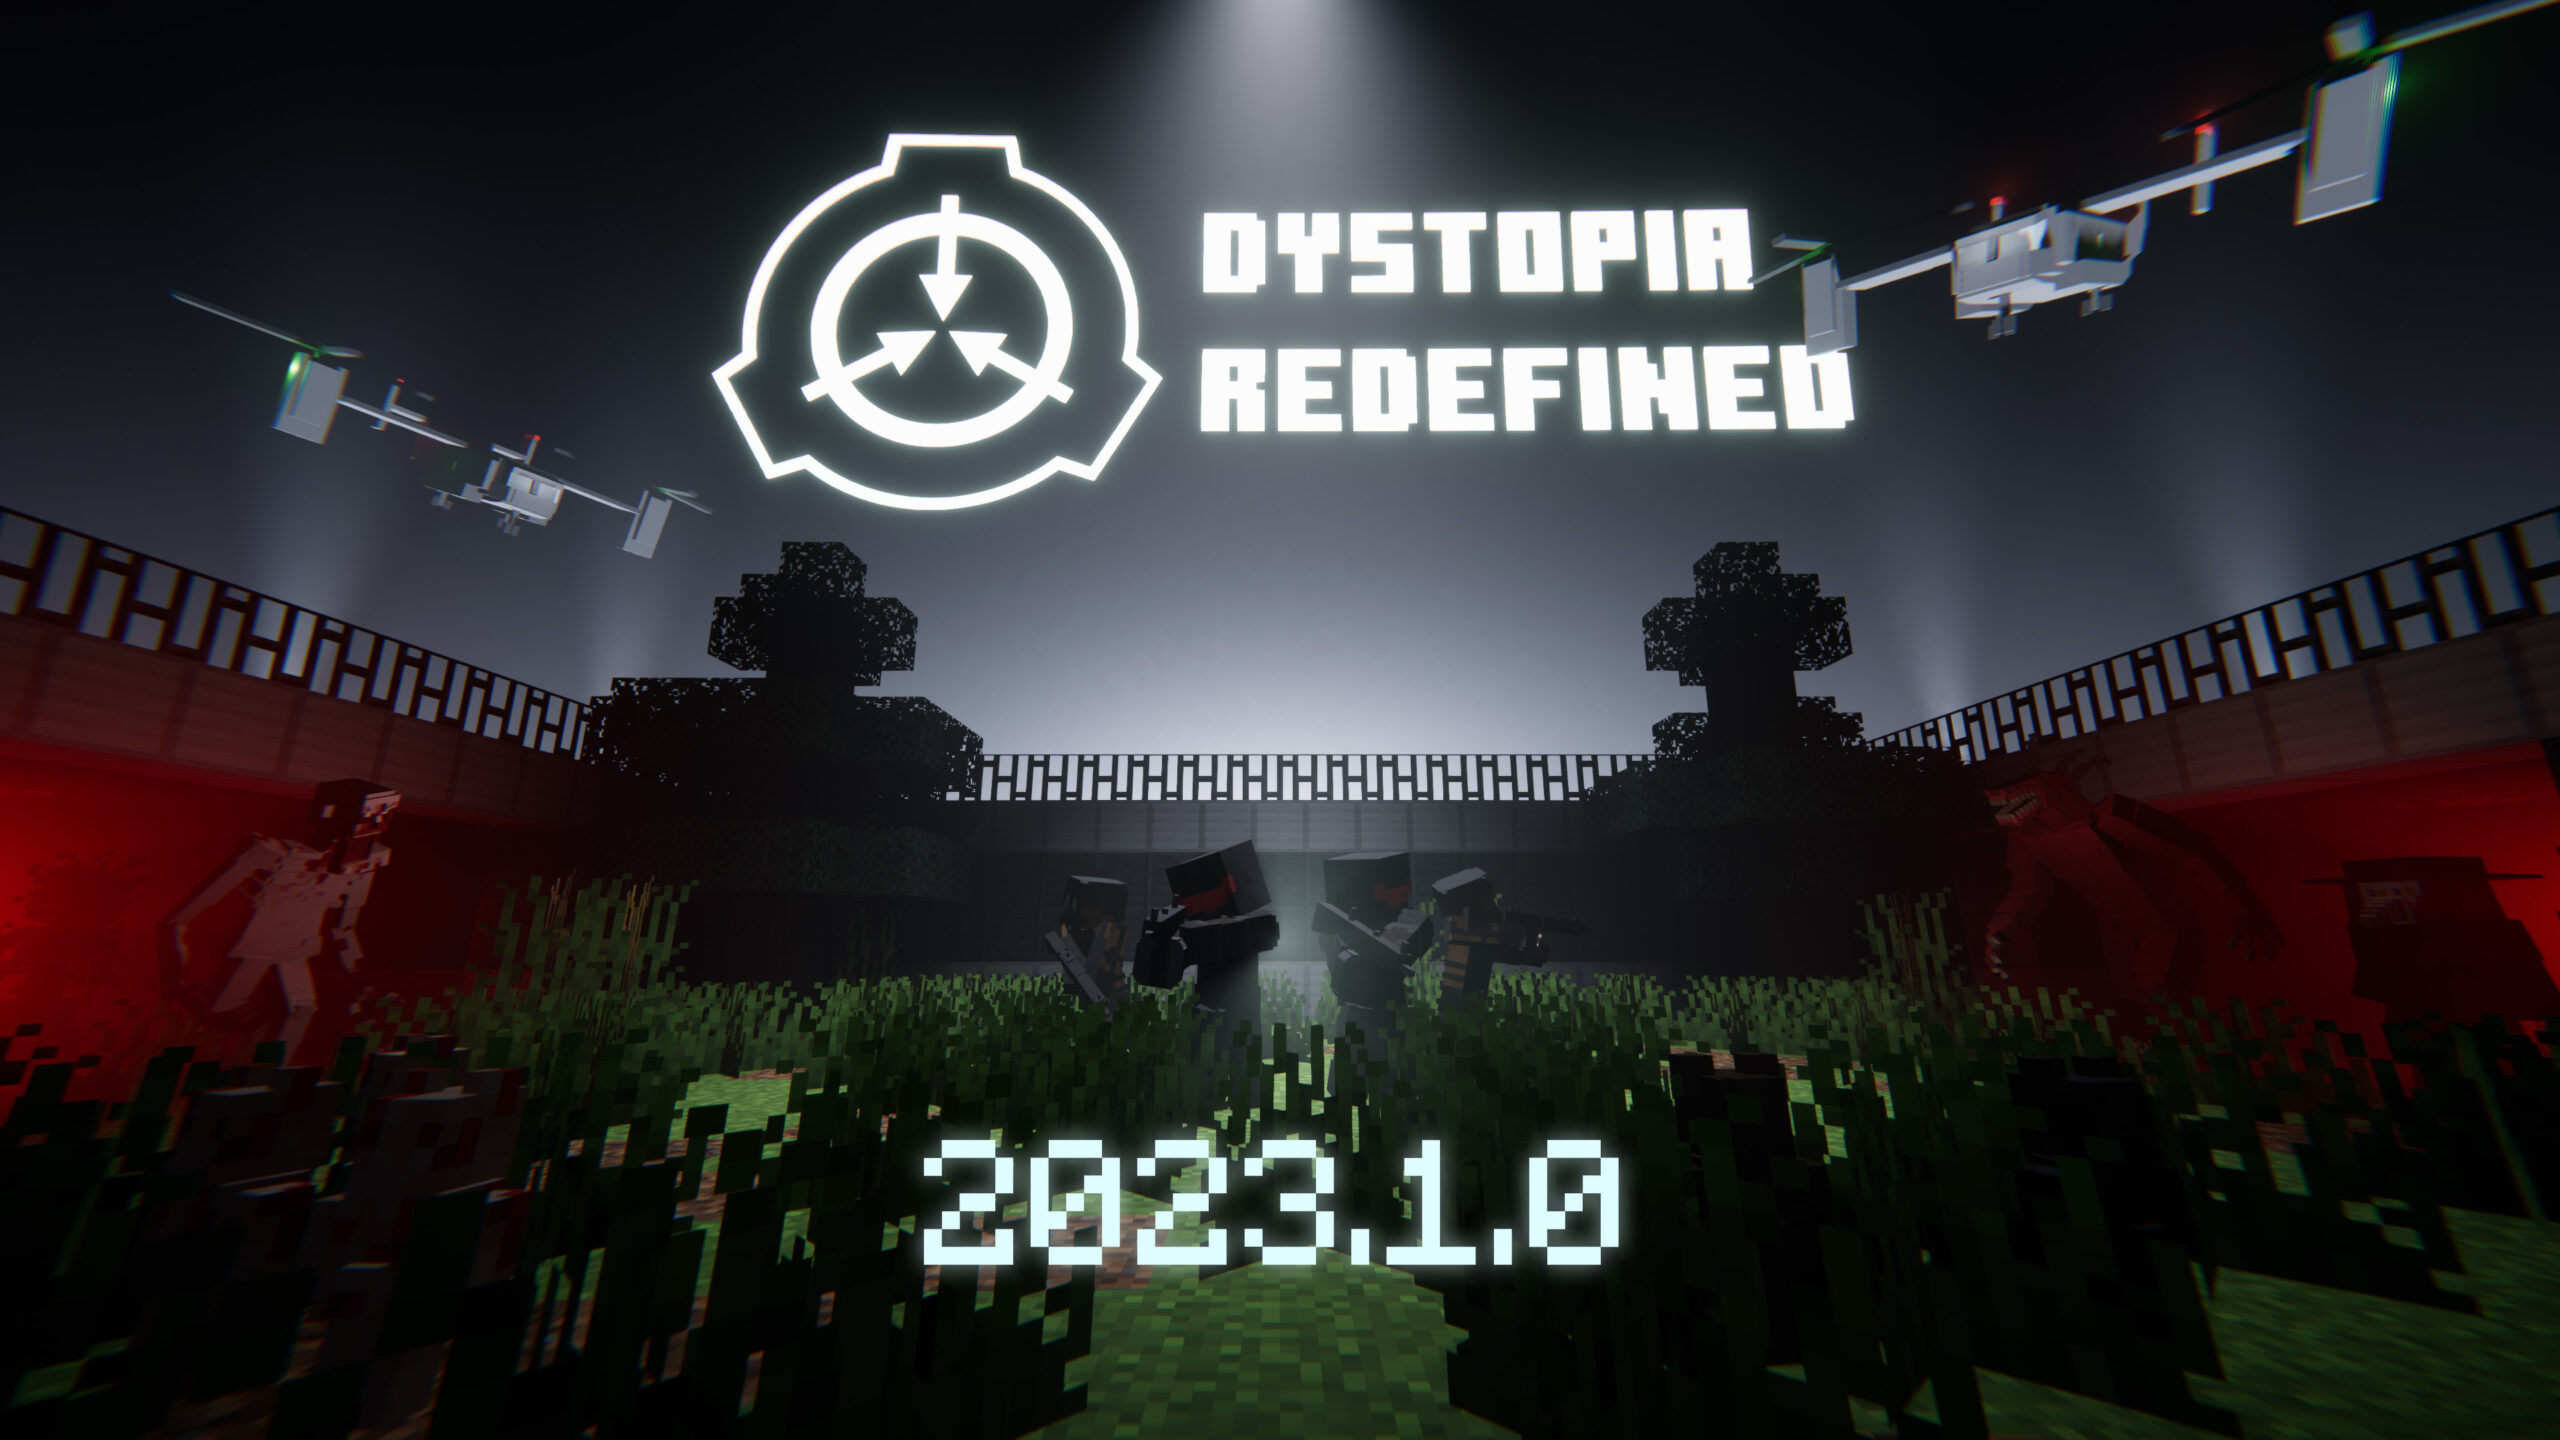 You are currently viewing SCP Dystopia: Redefined – 2023.1.0